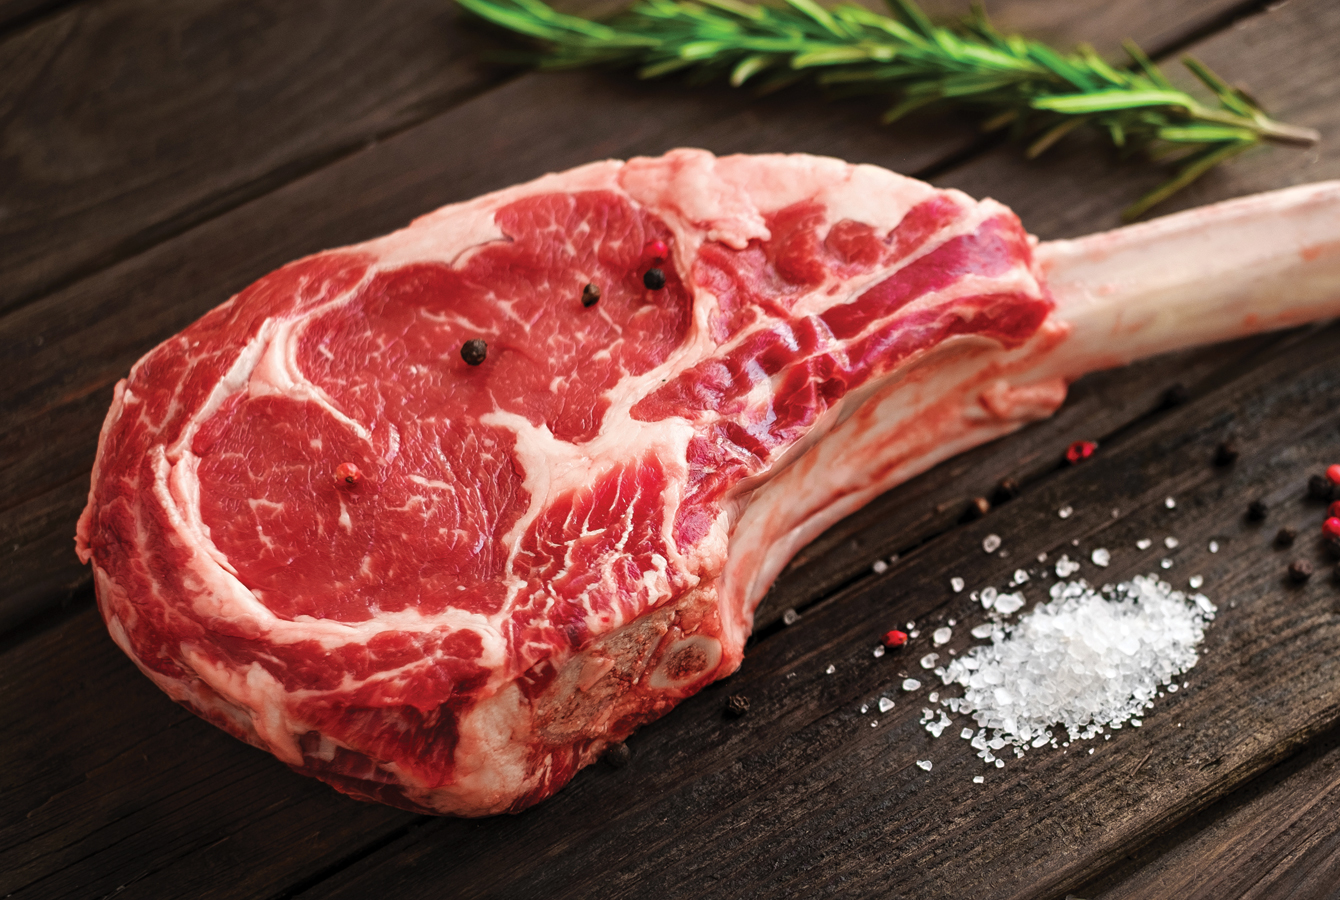 A raw Tomahawk steak on a shiny wooden surface, ready to be grilled.